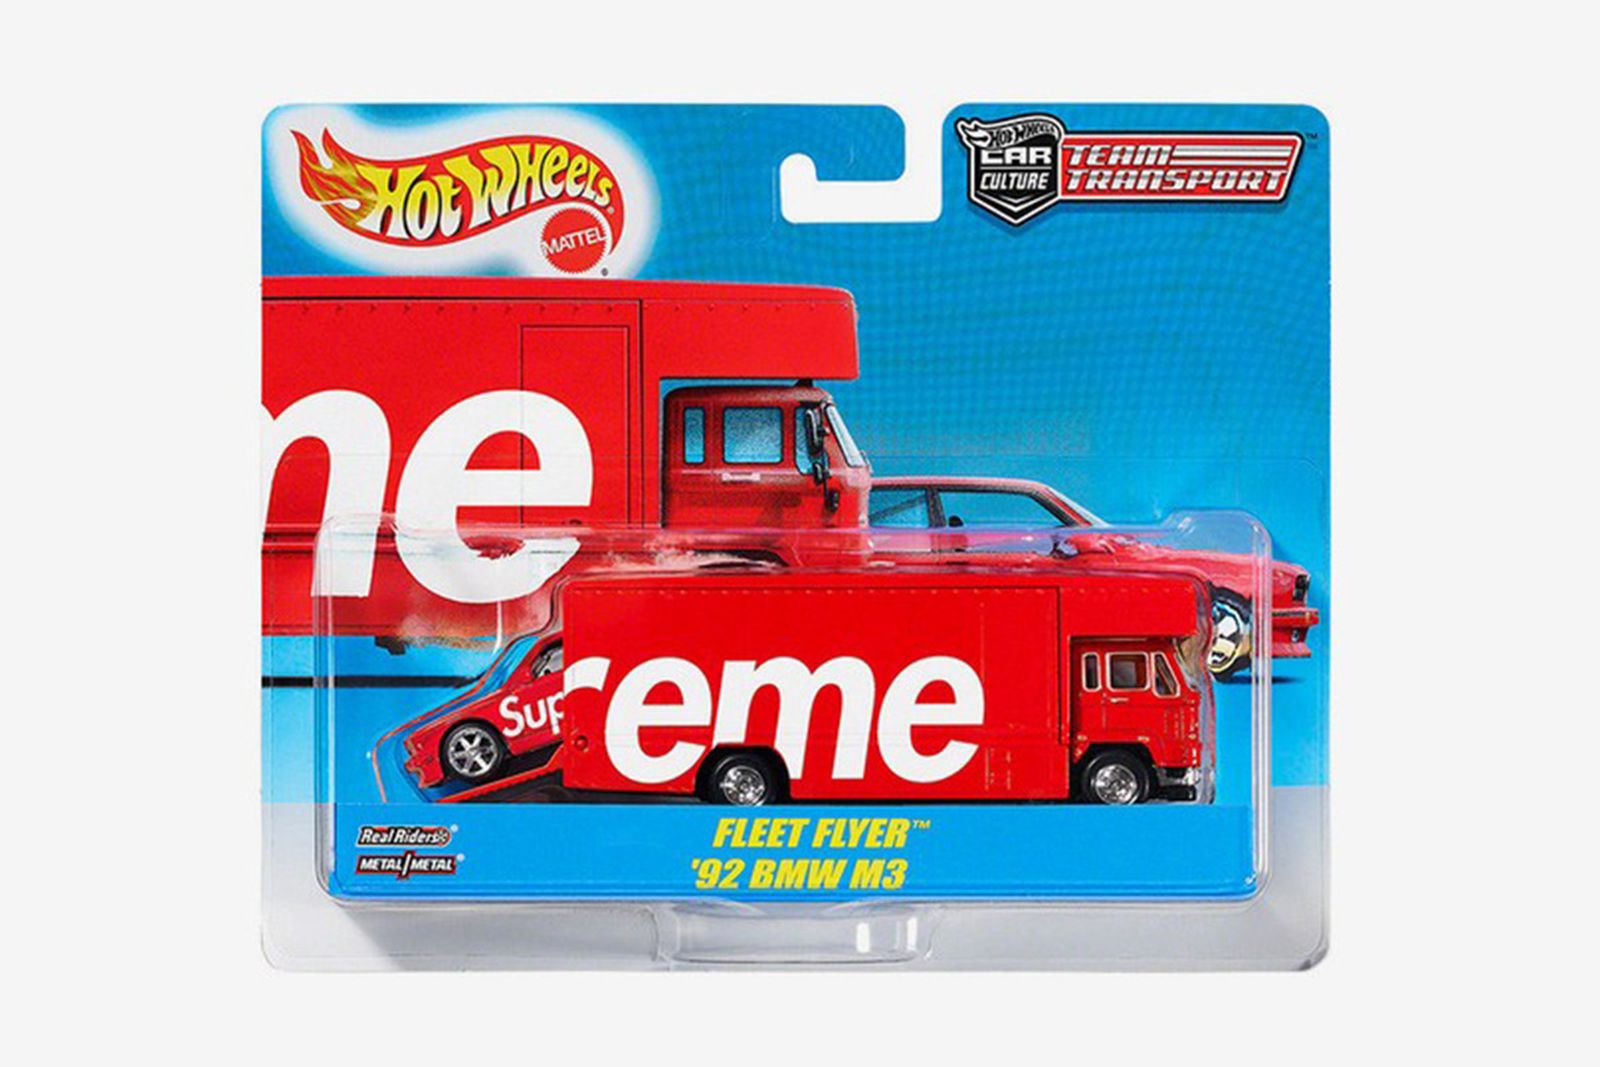 Supreme x Hot Wheels Fleet Flyer Collab: Where to Buy Today